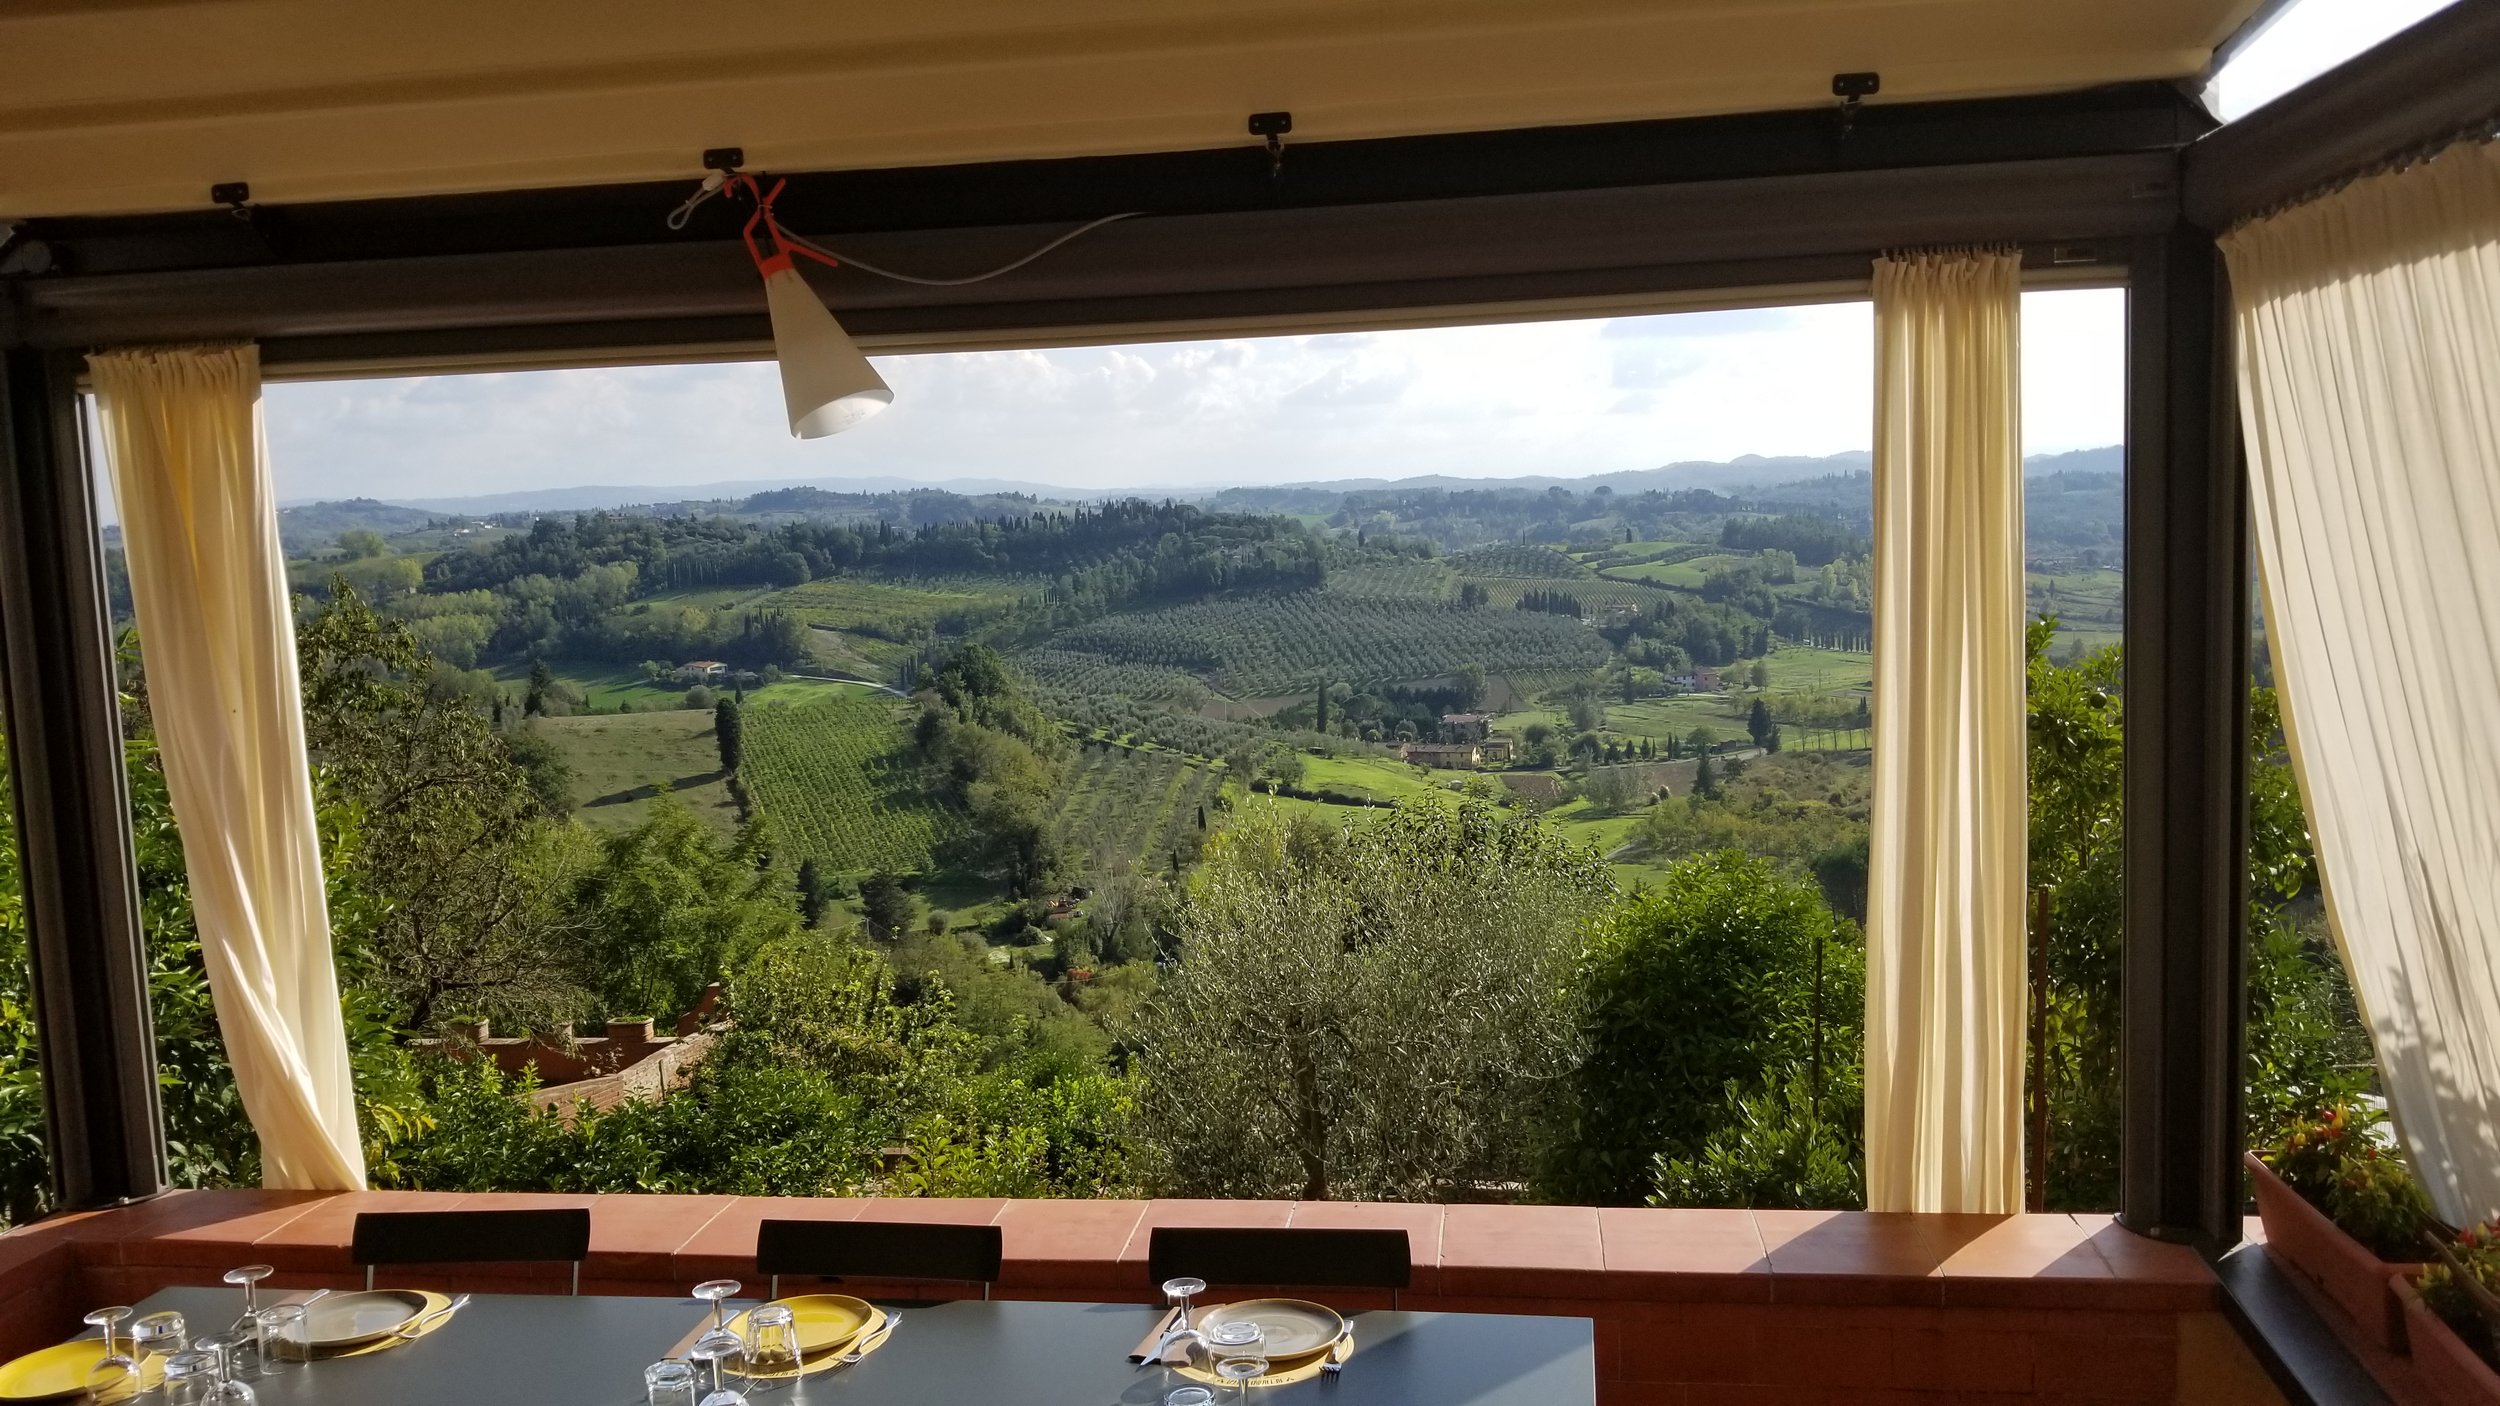 The view from our lunch in Tuscany